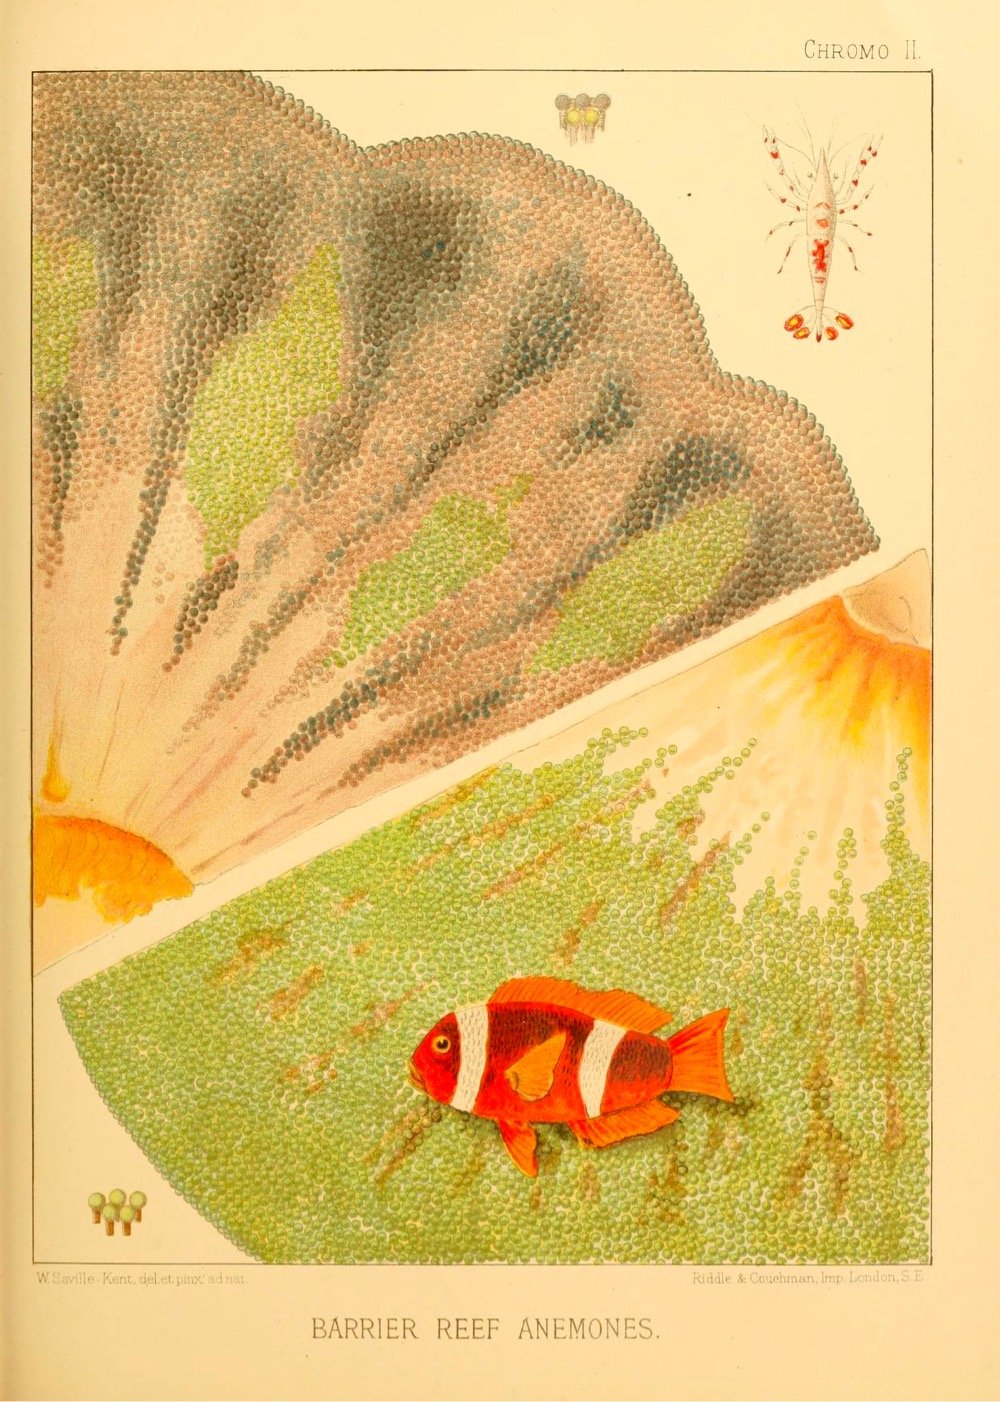 19th-Century Illustrations of the Great Barrier Reef